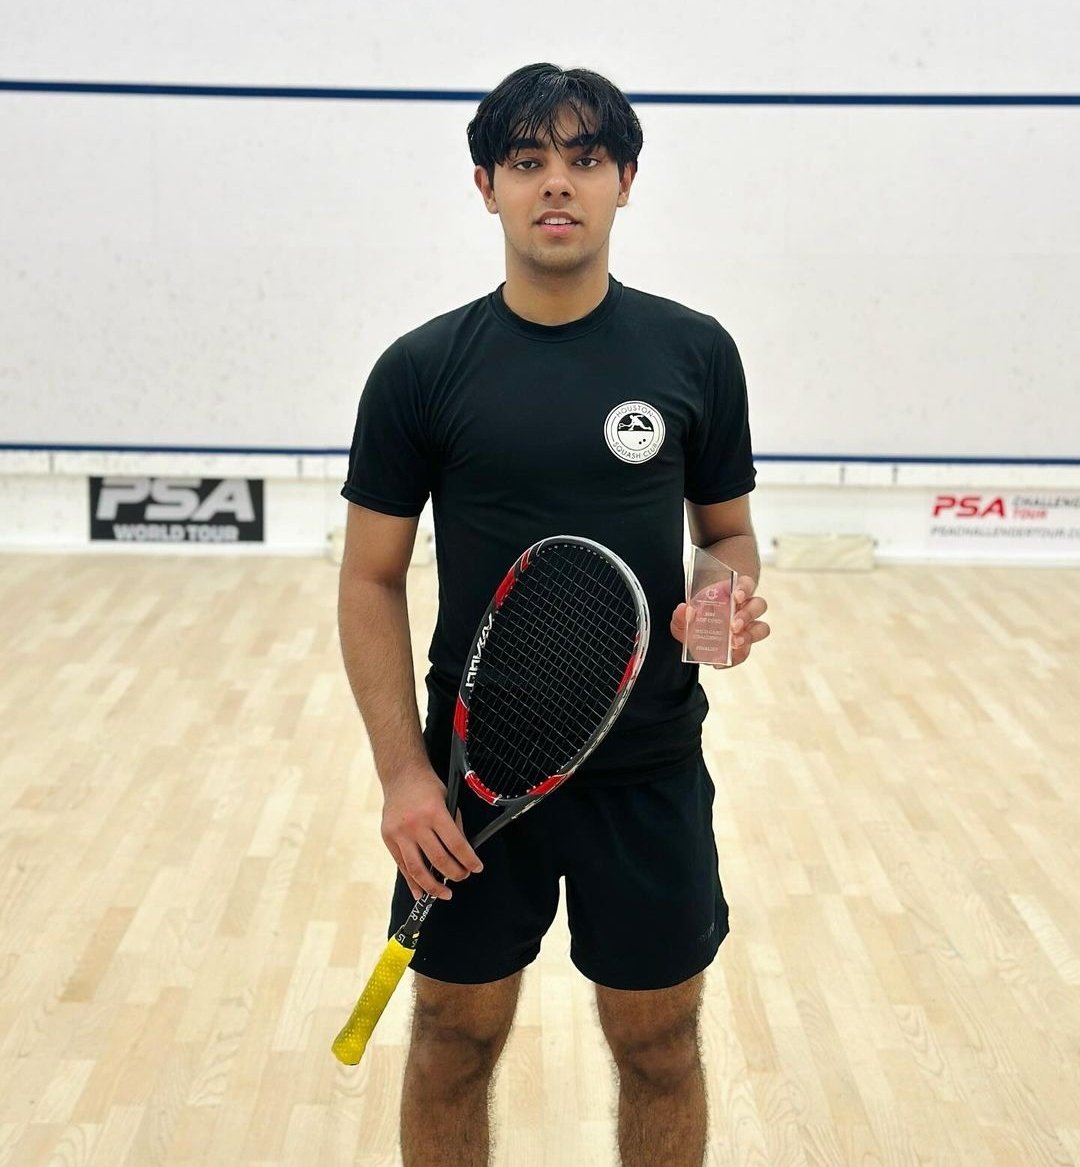 Pakistan's Mohammad Ashab Irfan qualifies for the semi-finals of Rochester ProAm in USA after beating Nigeria's Adegoke Onaopemipo 3-0 in the quarters 🇵🇰👏

#Squash